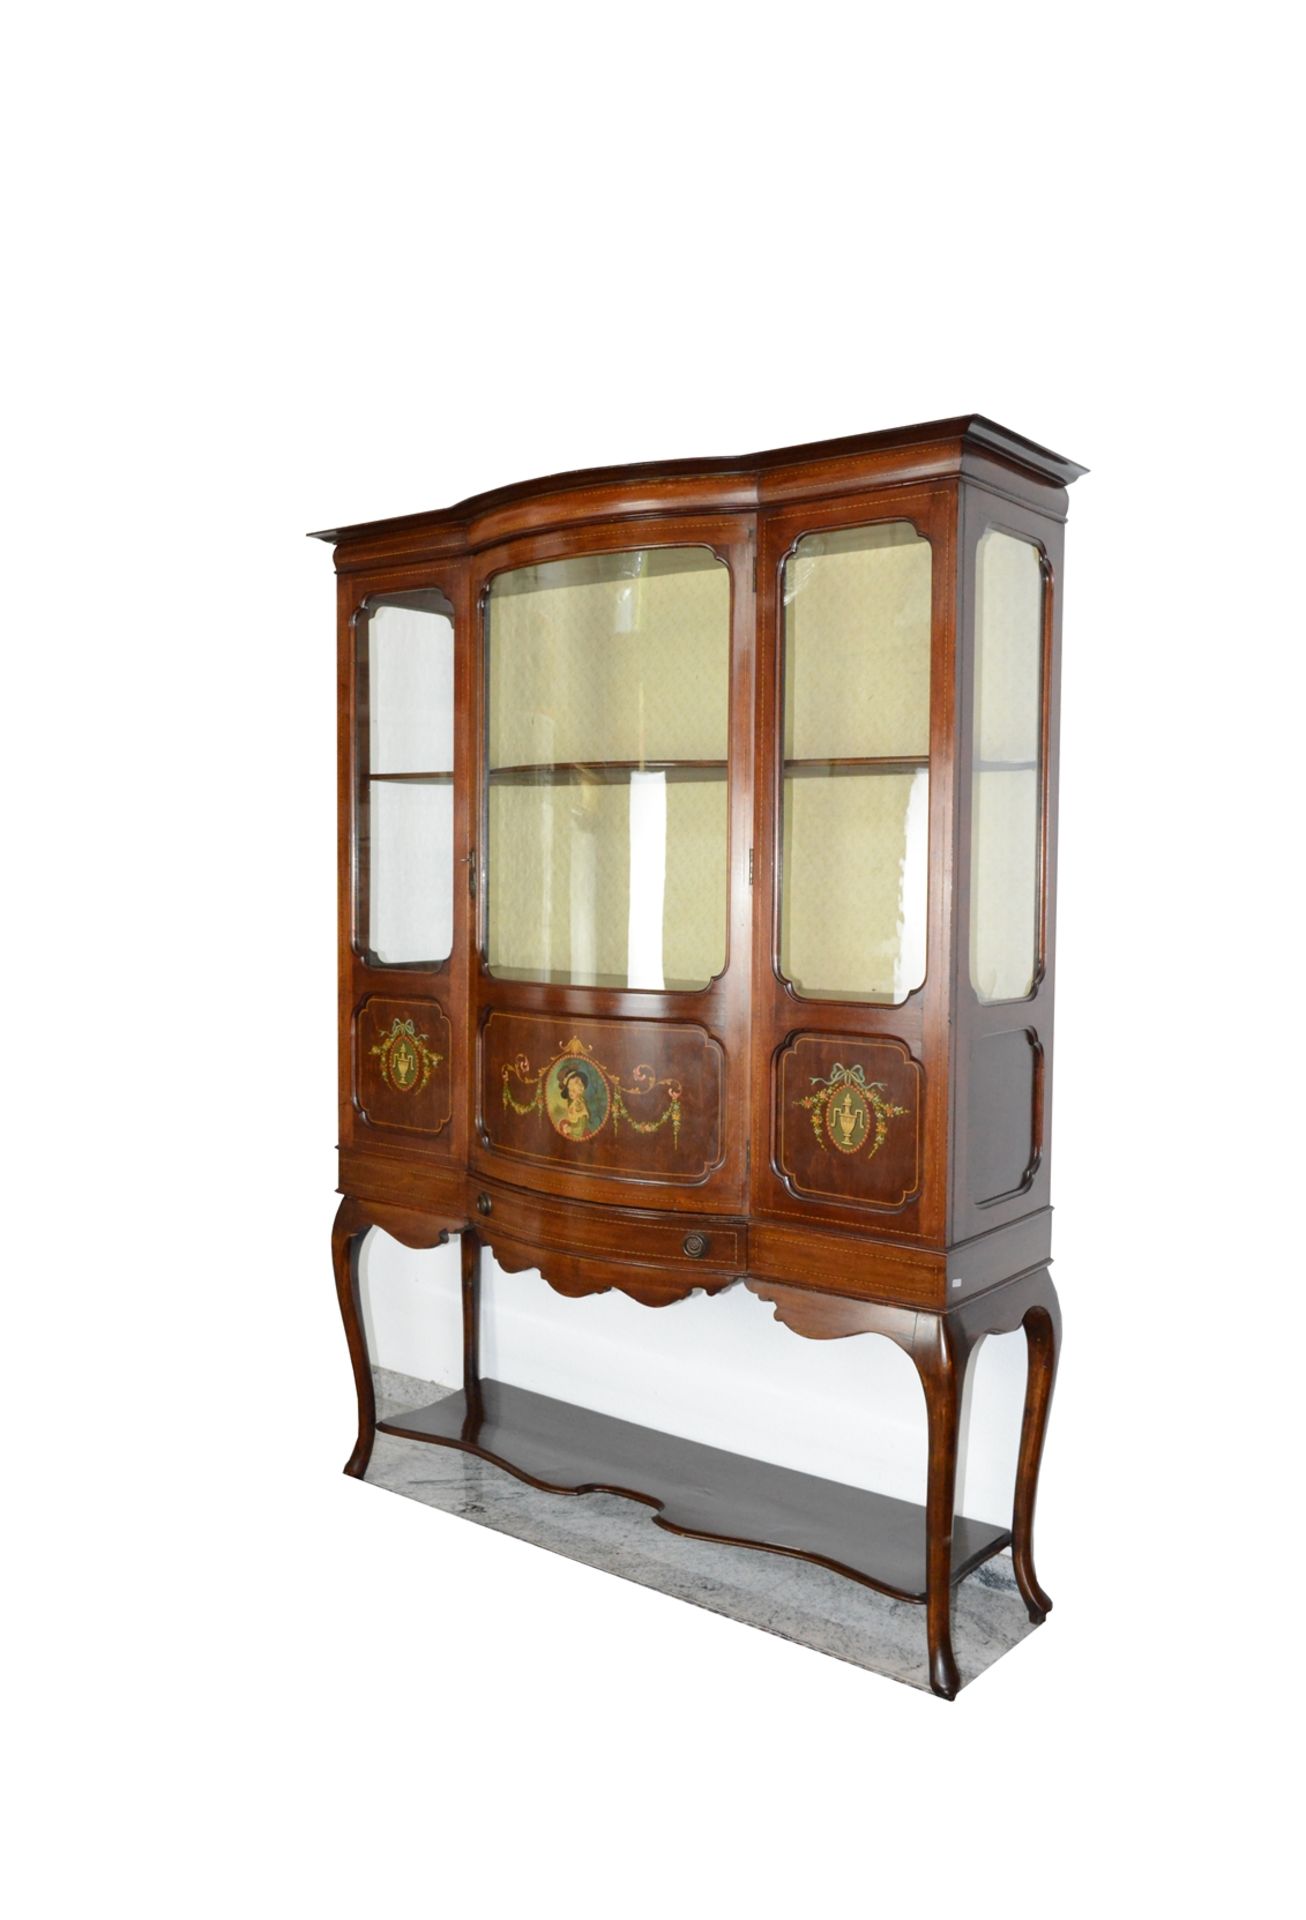 Elegant display case, beautiful polychrome decorations in the centre, mouth-blown glass with small  - Image 3 of 5